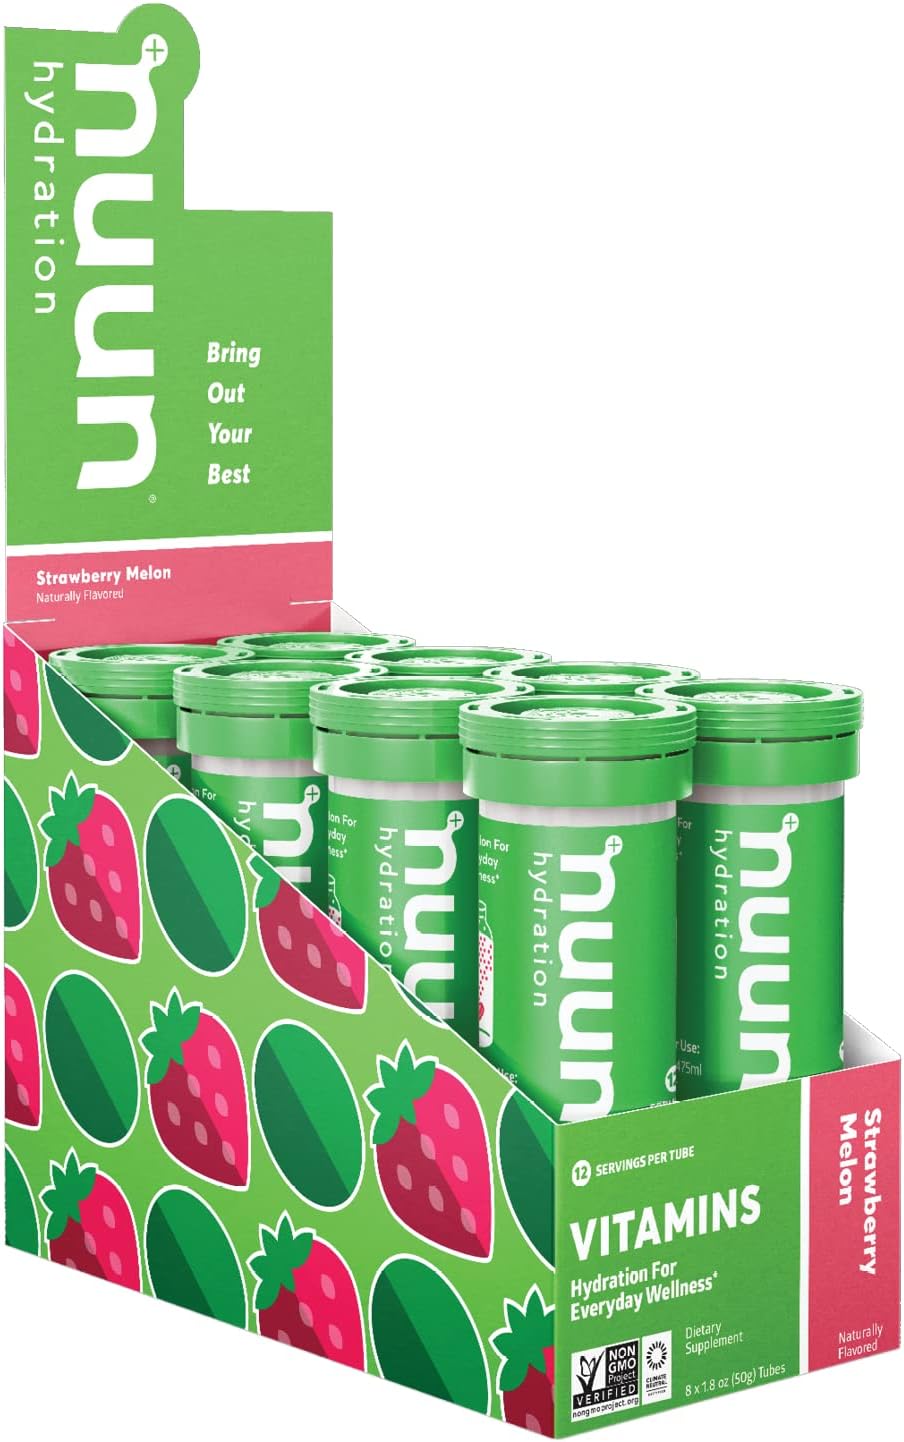 Nuun Hydration Vitamins Electrolyte Tablets + Vitamins, Strawberry Melon, 8 Pack (96 Servings)